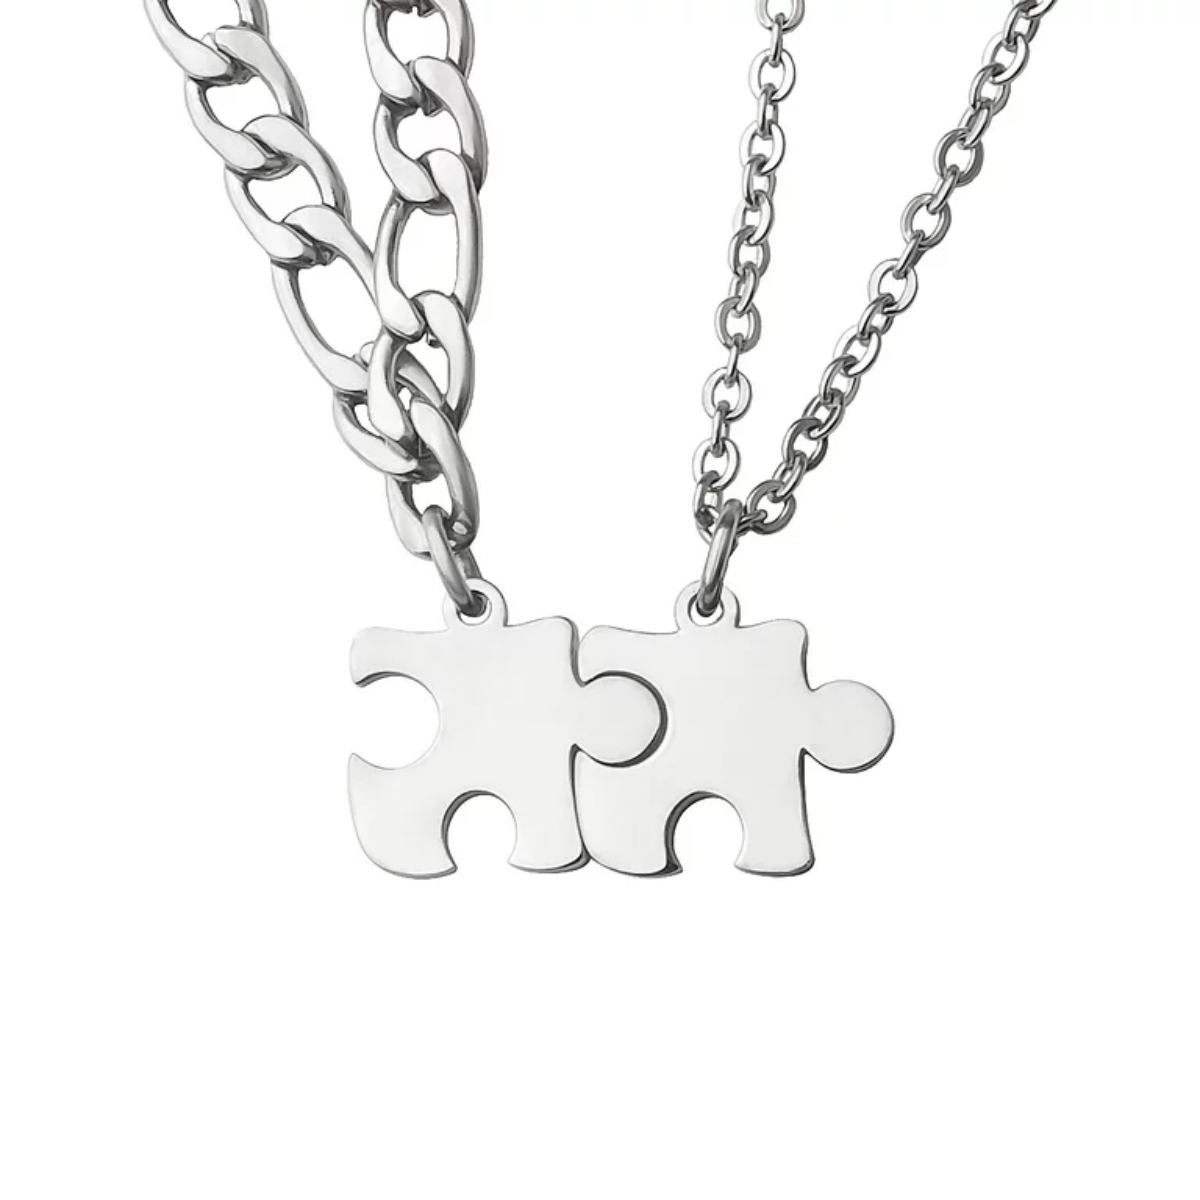 33. Unlock Your Love with the Enchanting Iron Anniversary Puzzle Necklace for Her